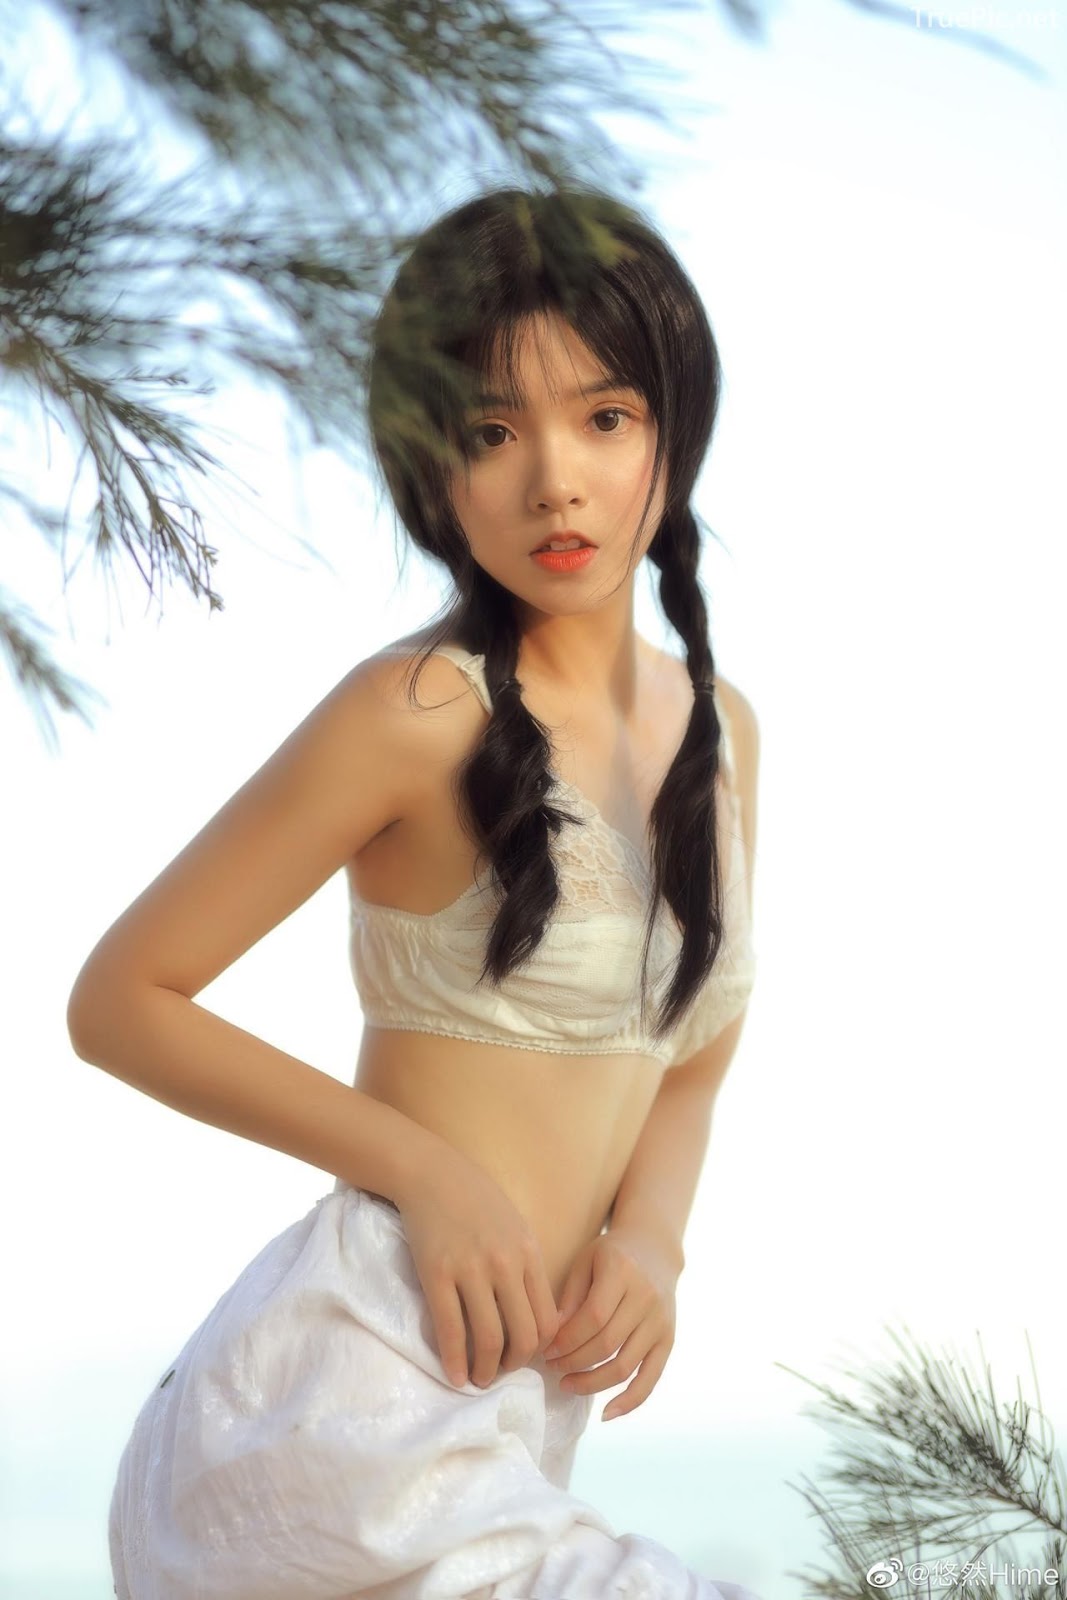 Chinese bautiful angel - Stay with you on a beautiful beach - TruePic.net - Picture 17